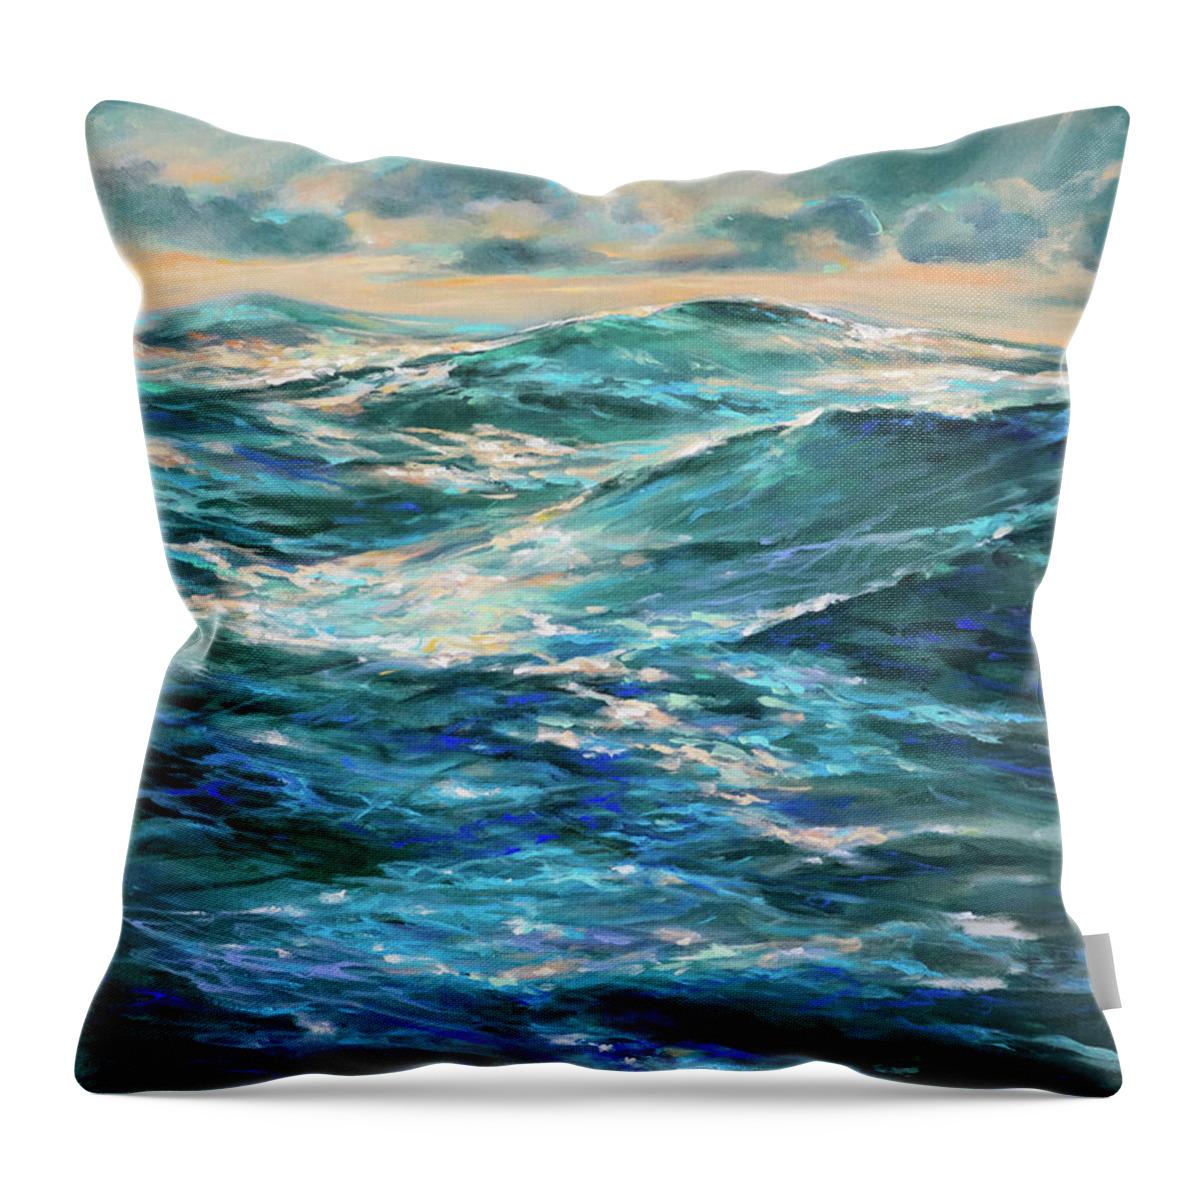 Ocean Throw Pillow featuring the painting Calm Before by Linda Olsen